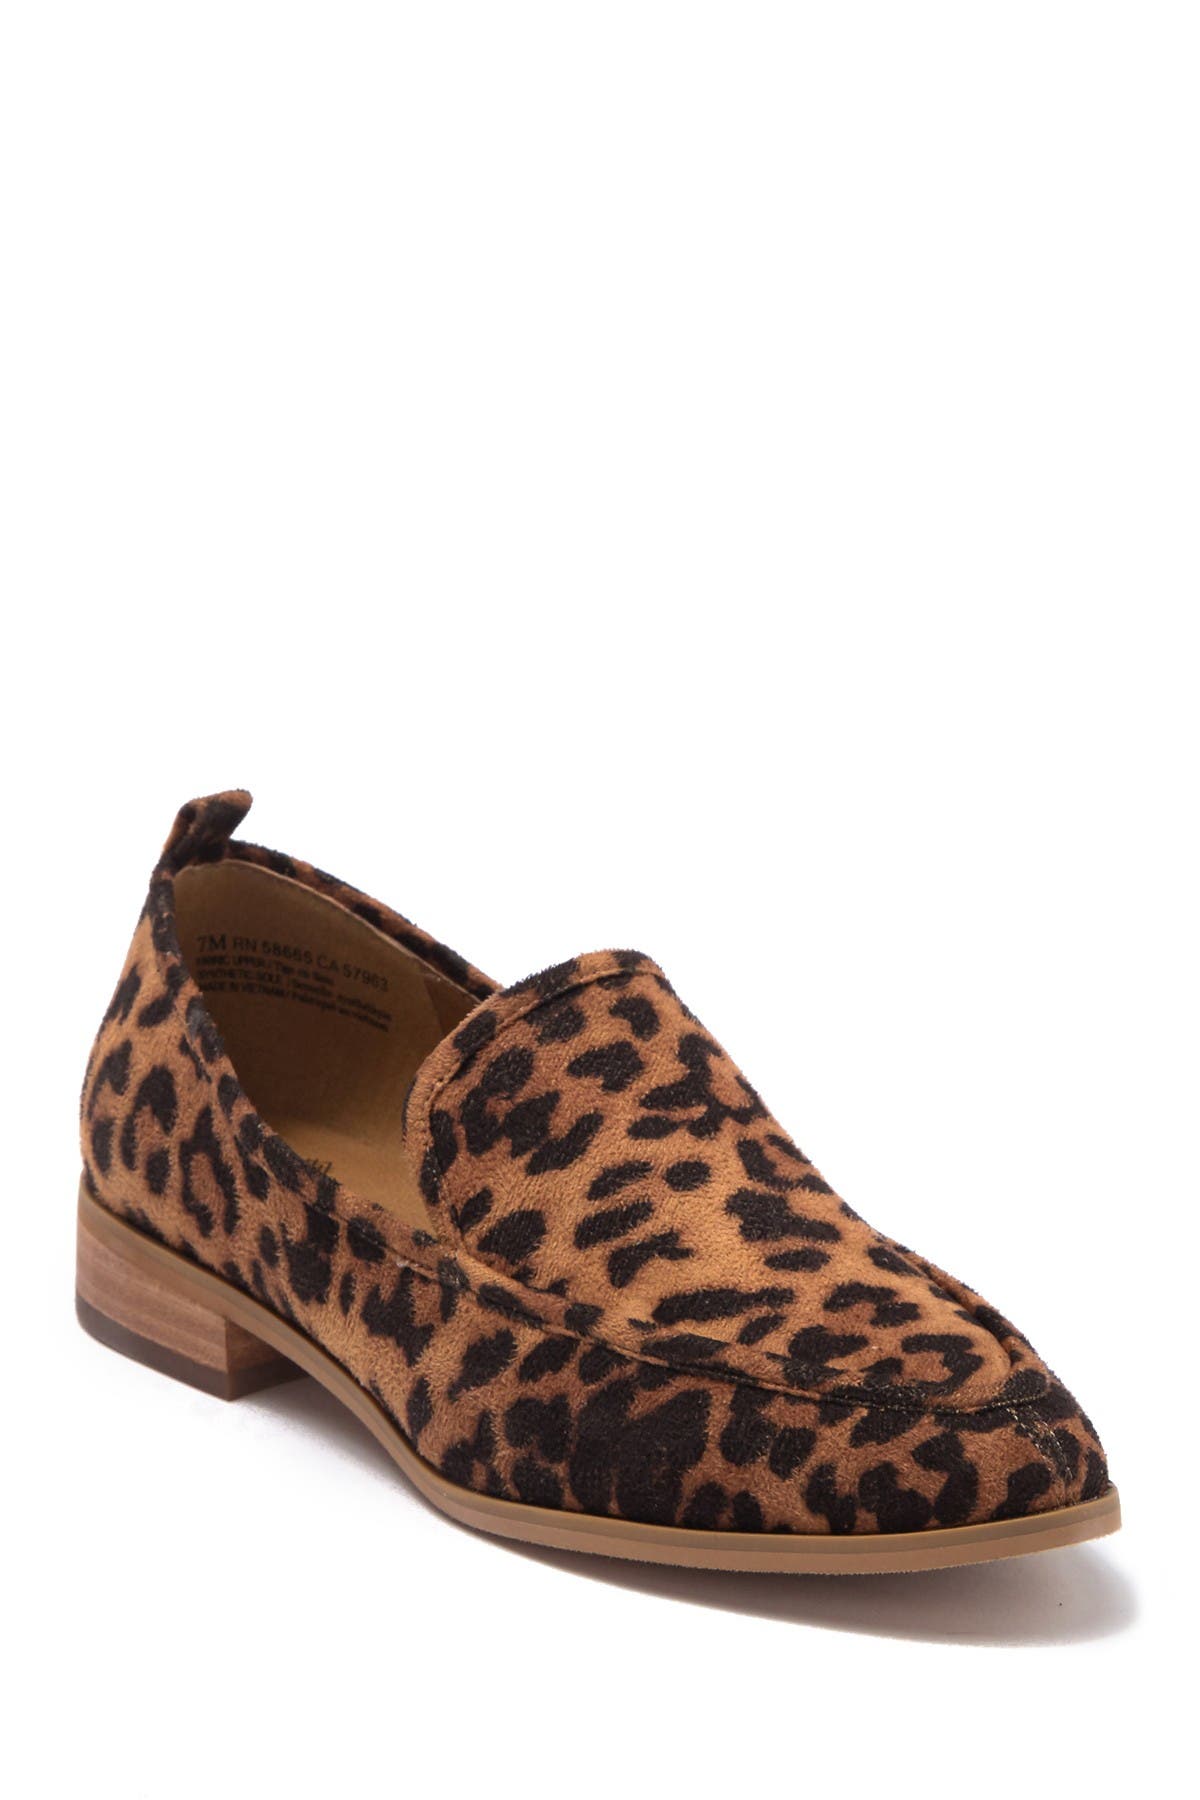 wide width animal print shoes